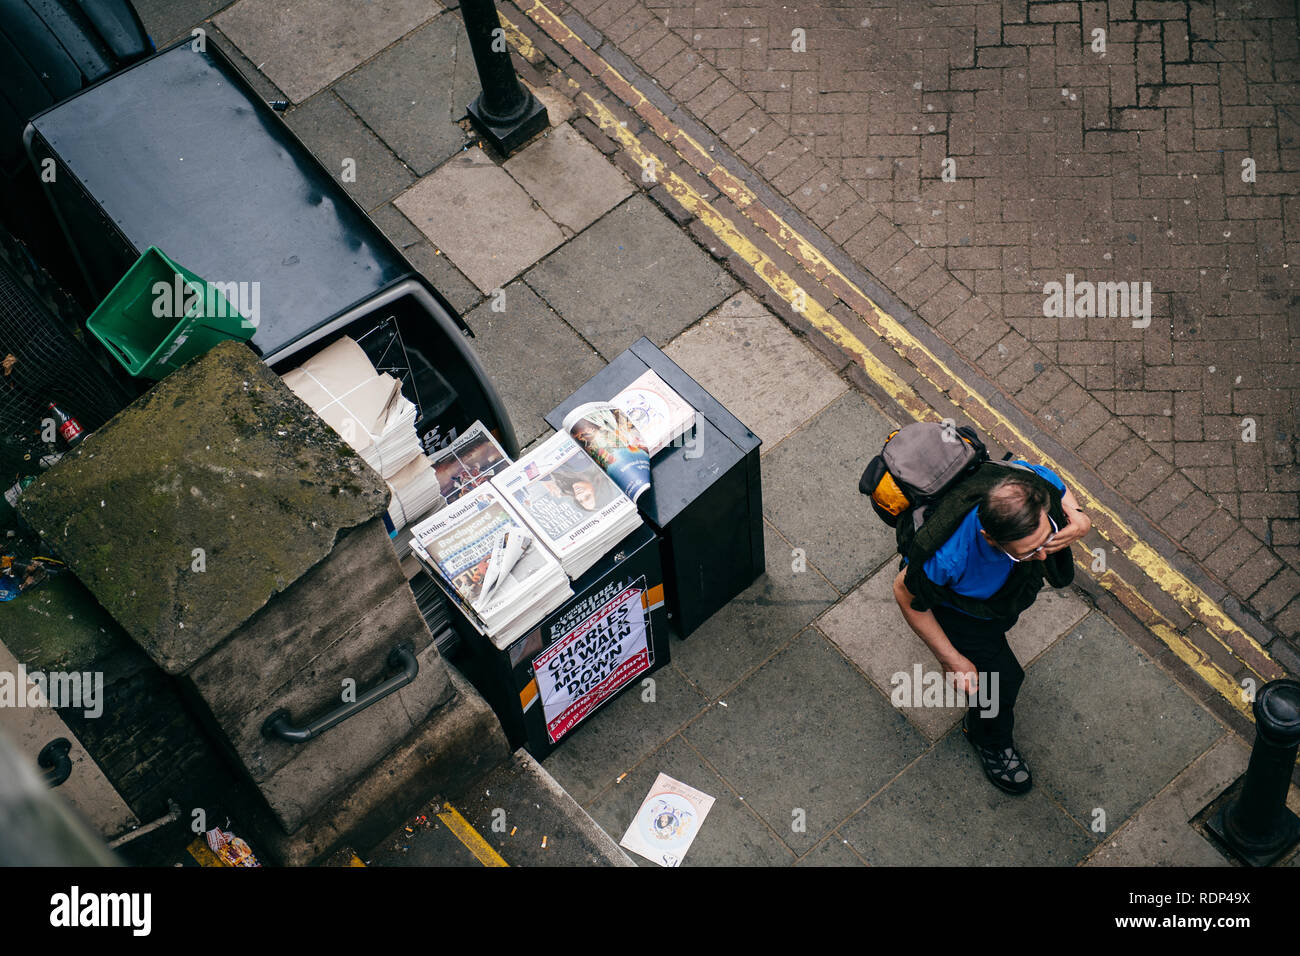 LONDON, UNITED KINGDOM - MAY 18, 2018: View from above of London Evening Standard distribution newspaper stand with large banner Prince Charles to walk Meghan Markel down aisle  Stock Photo